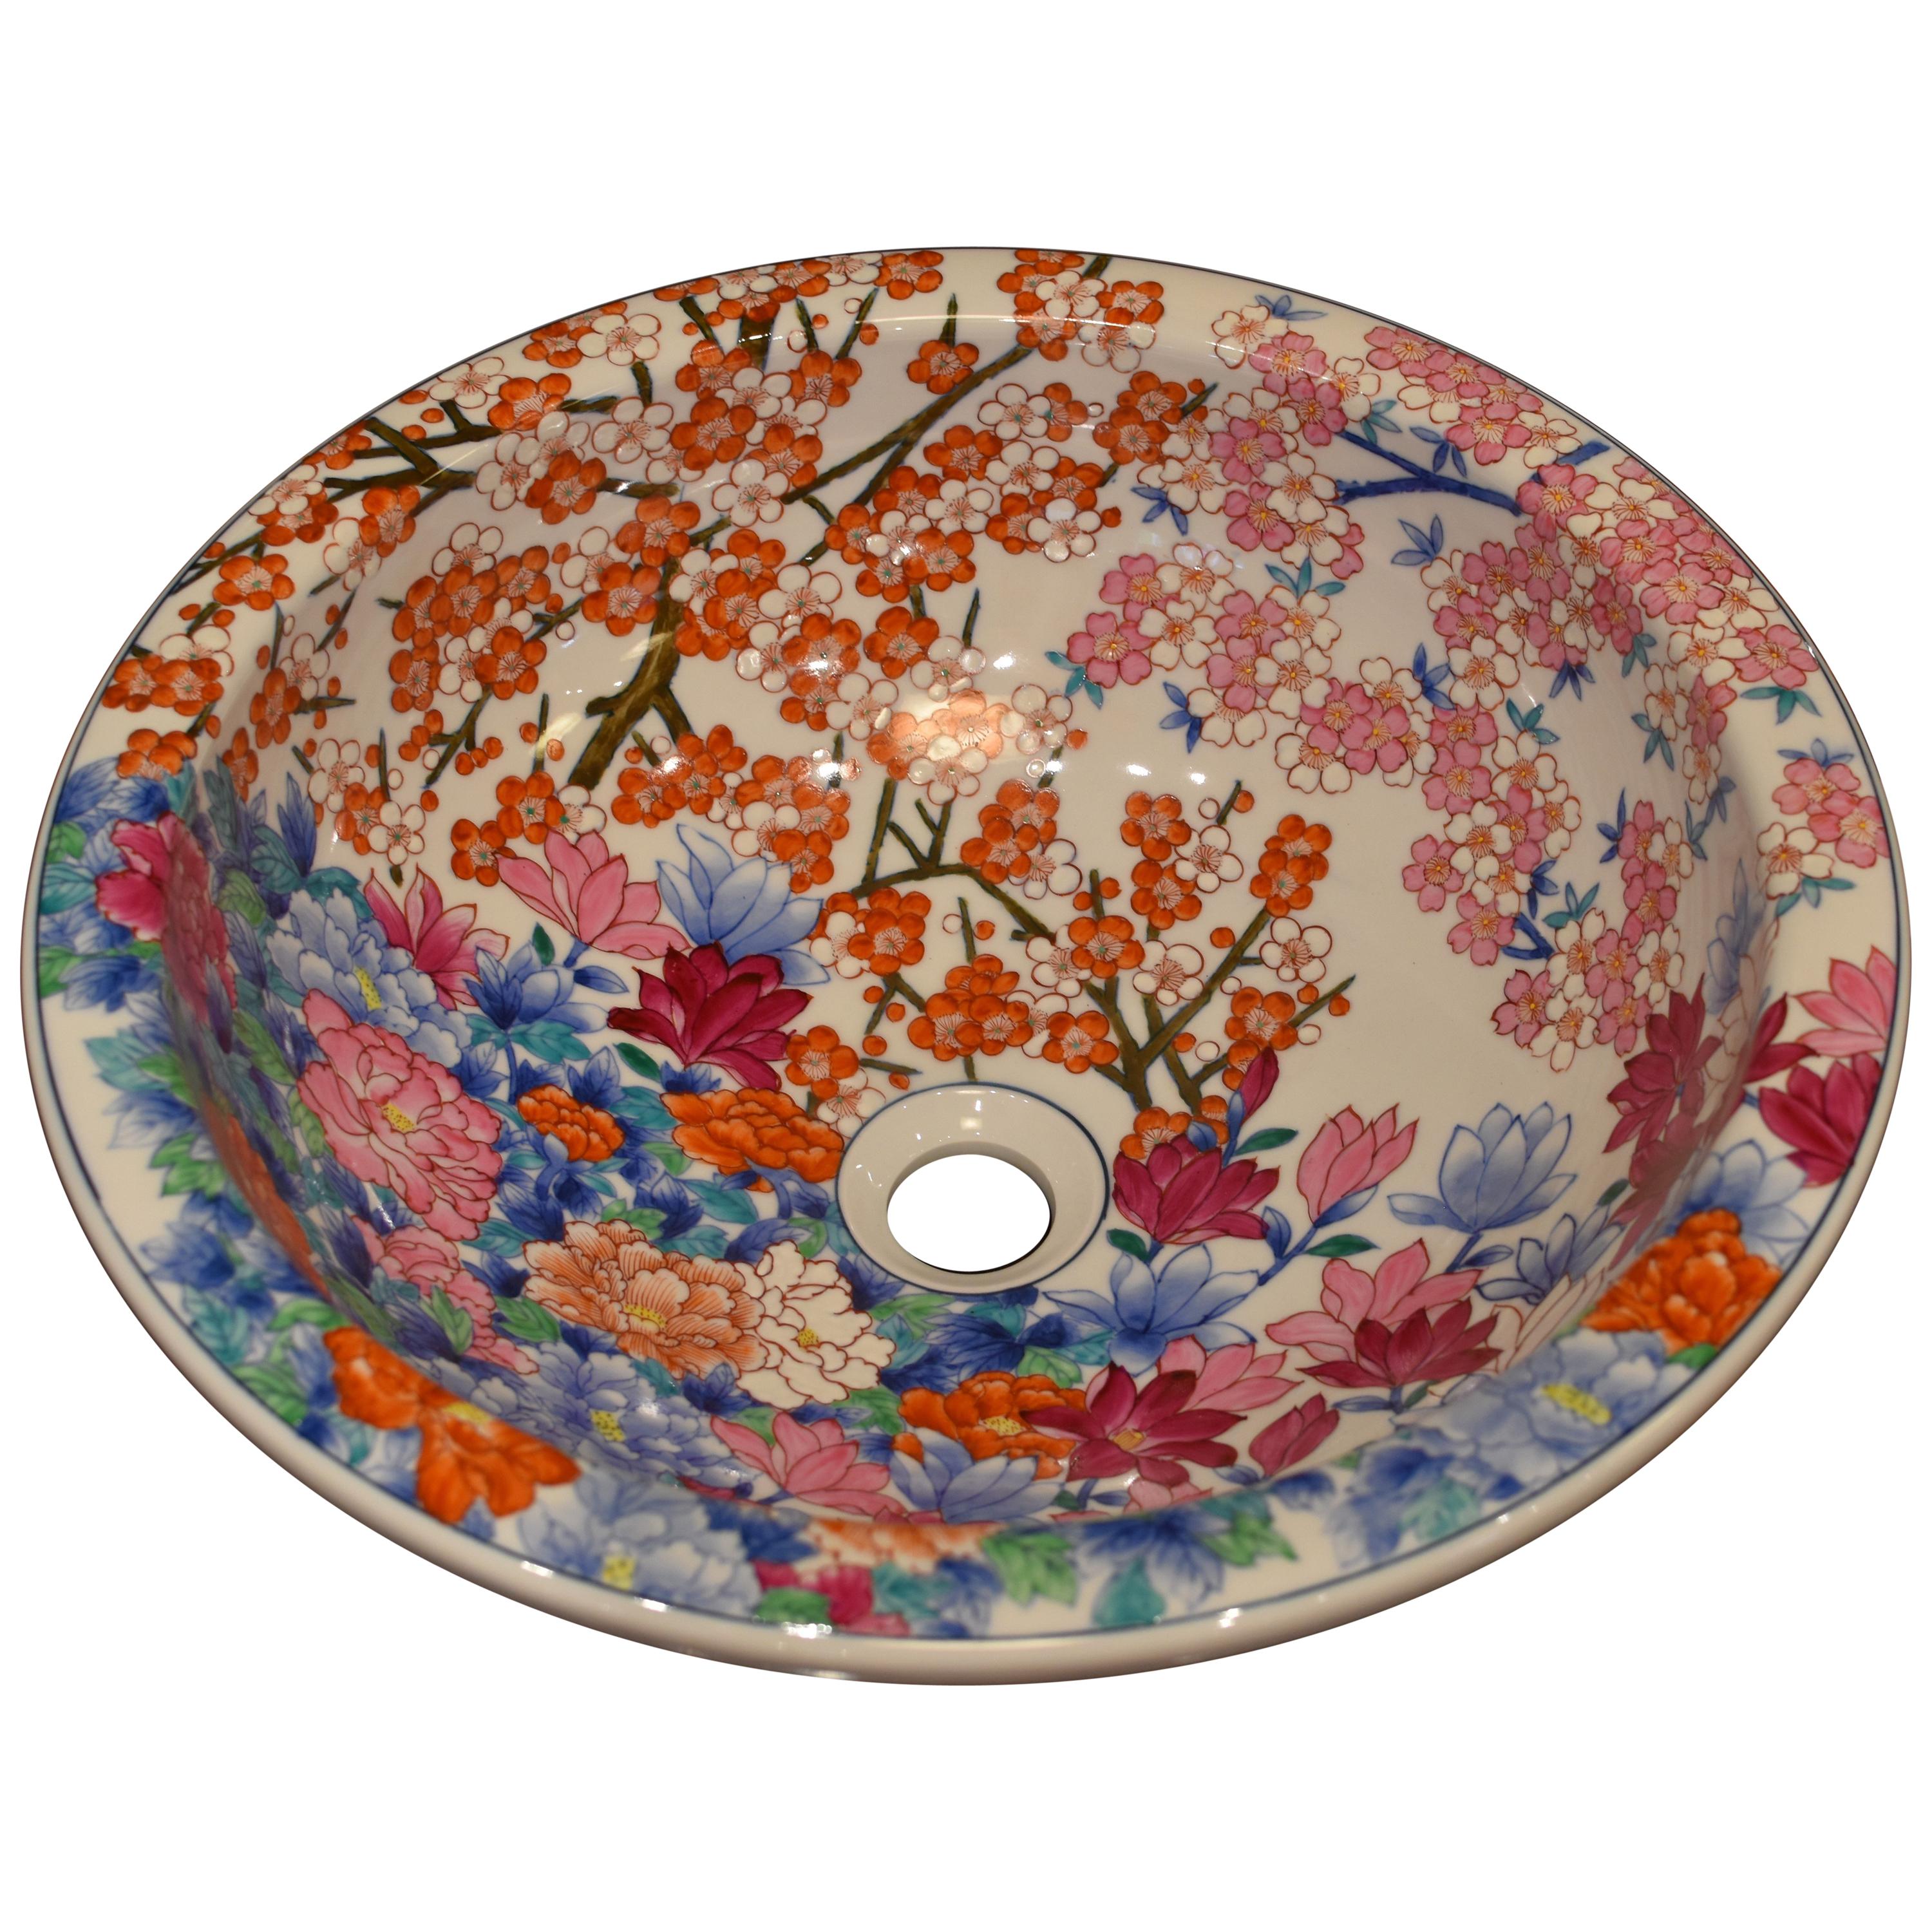 Japanese Hand-Painted Porcelain Washbasin by Contemporary Master Artist